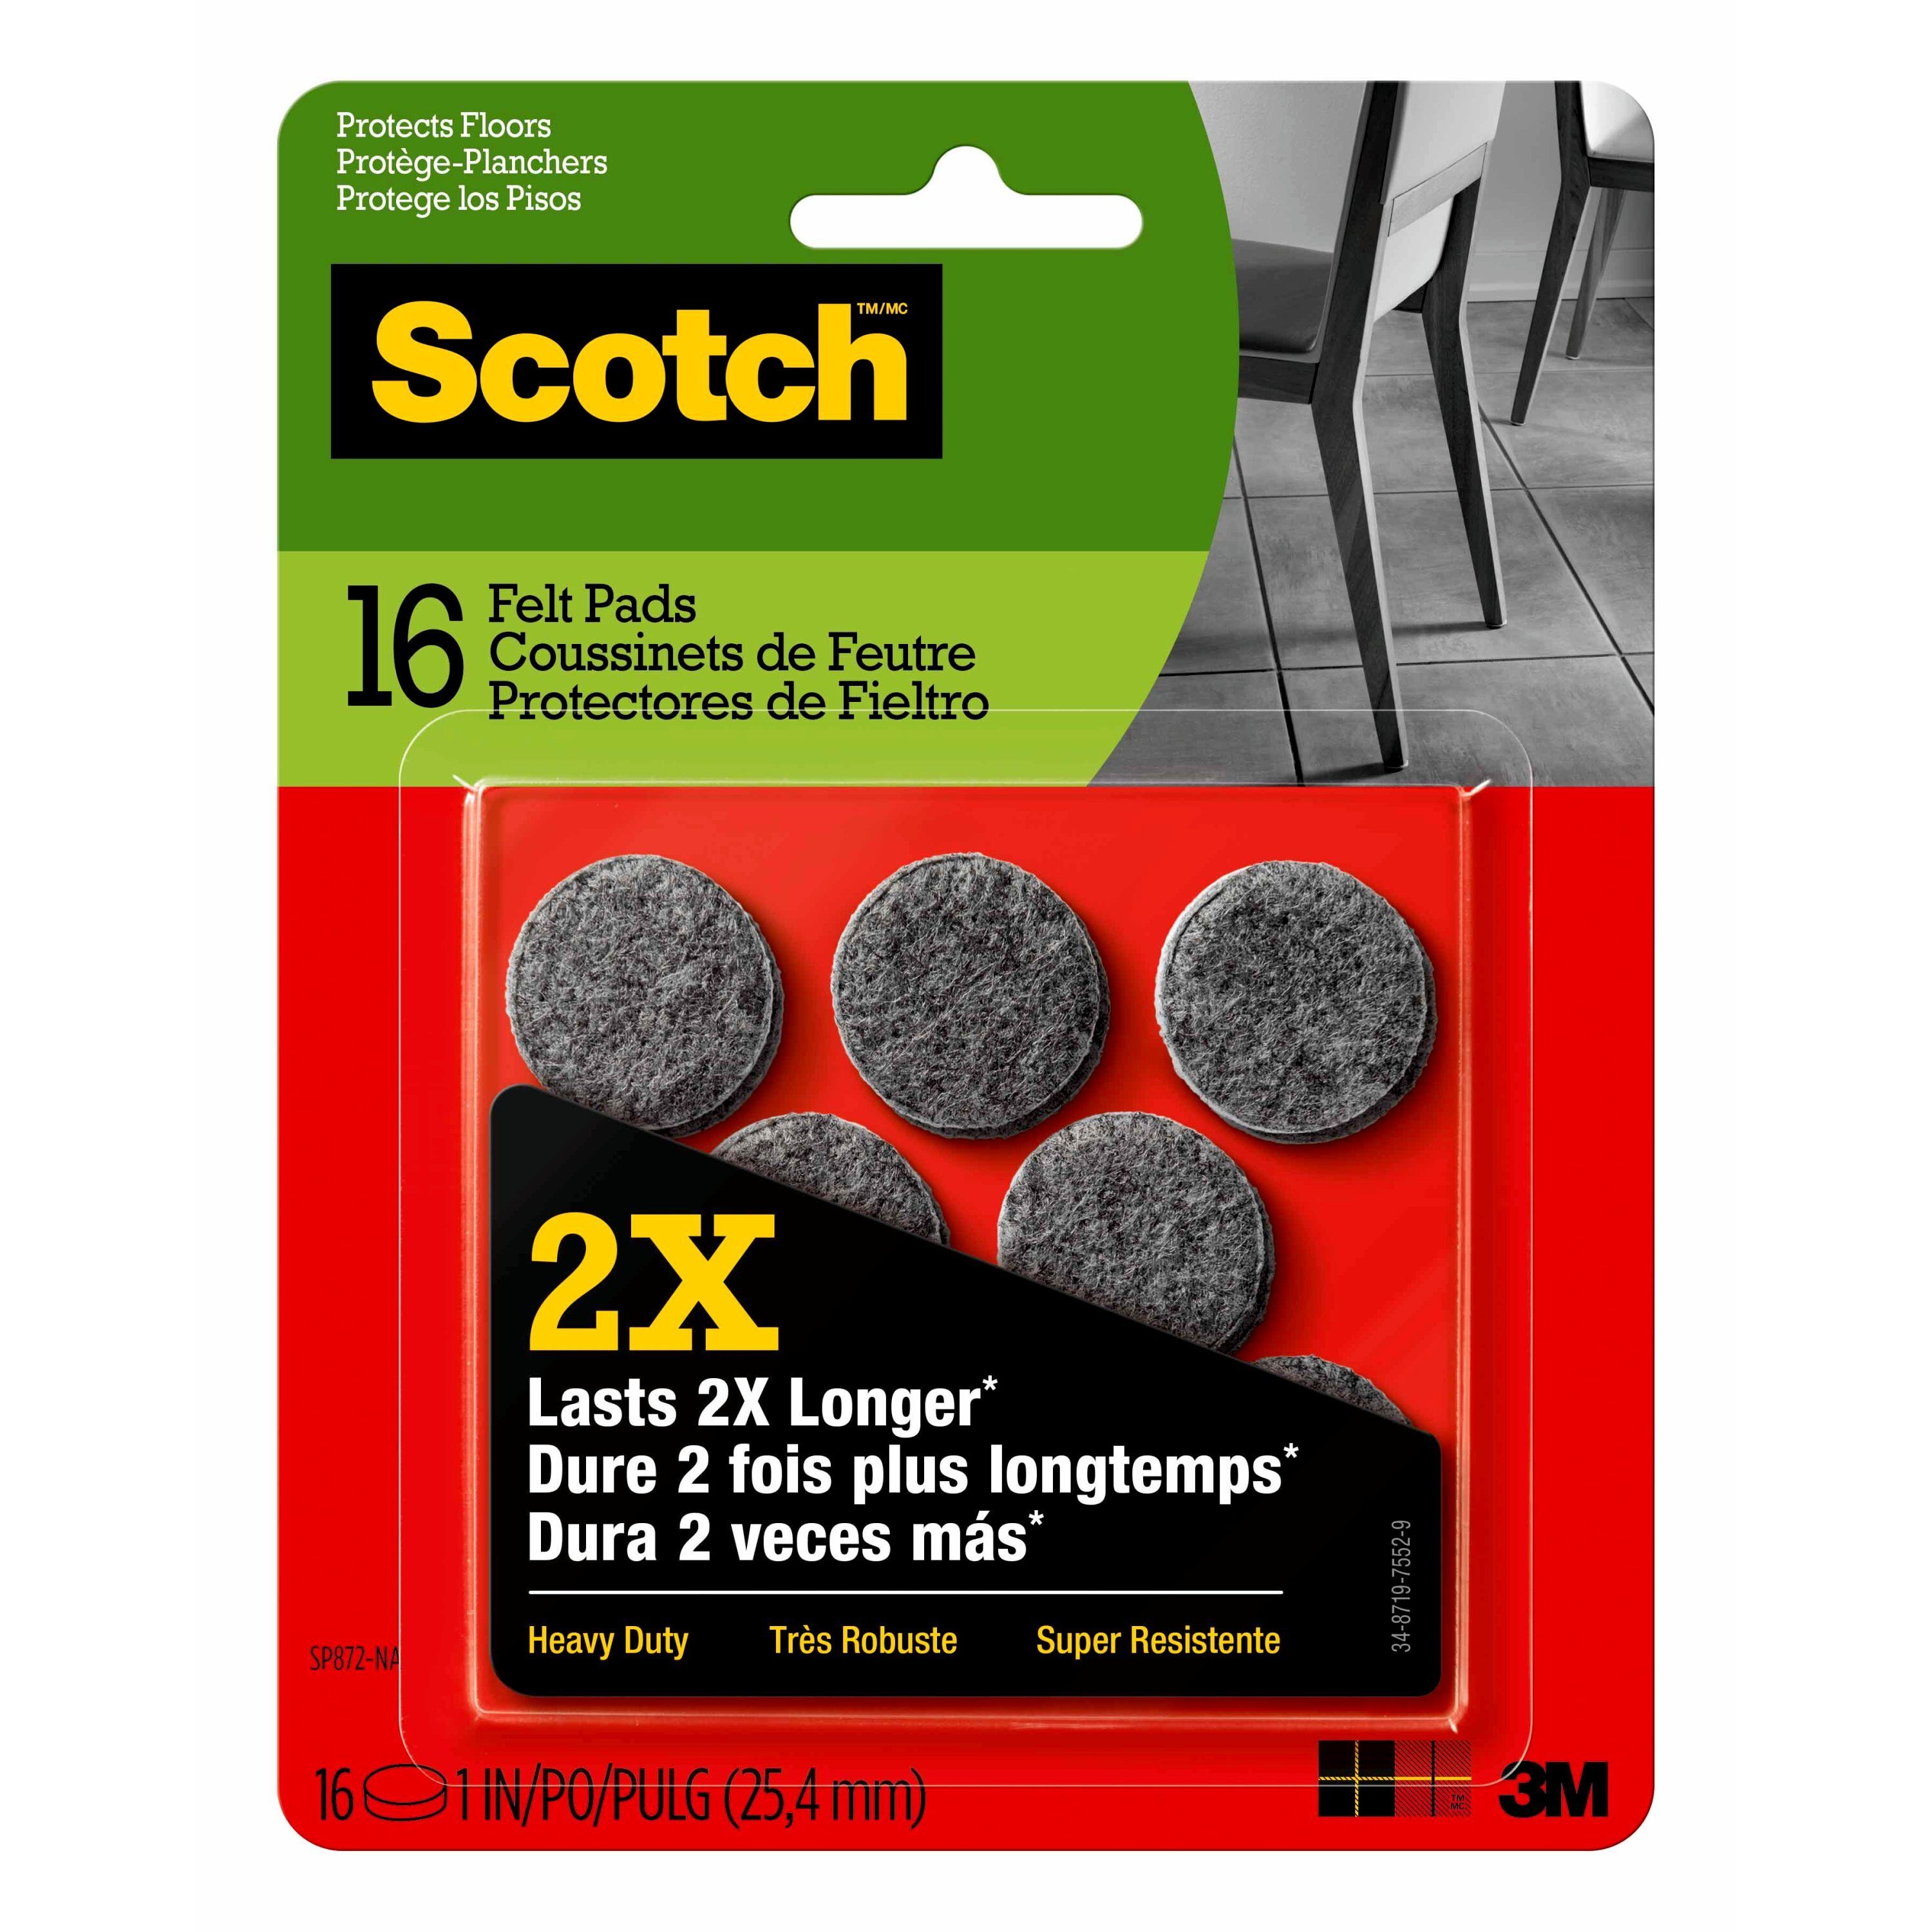 Softtouch 60 Pack Round Domed Self-Stick Felt Furniture Pads